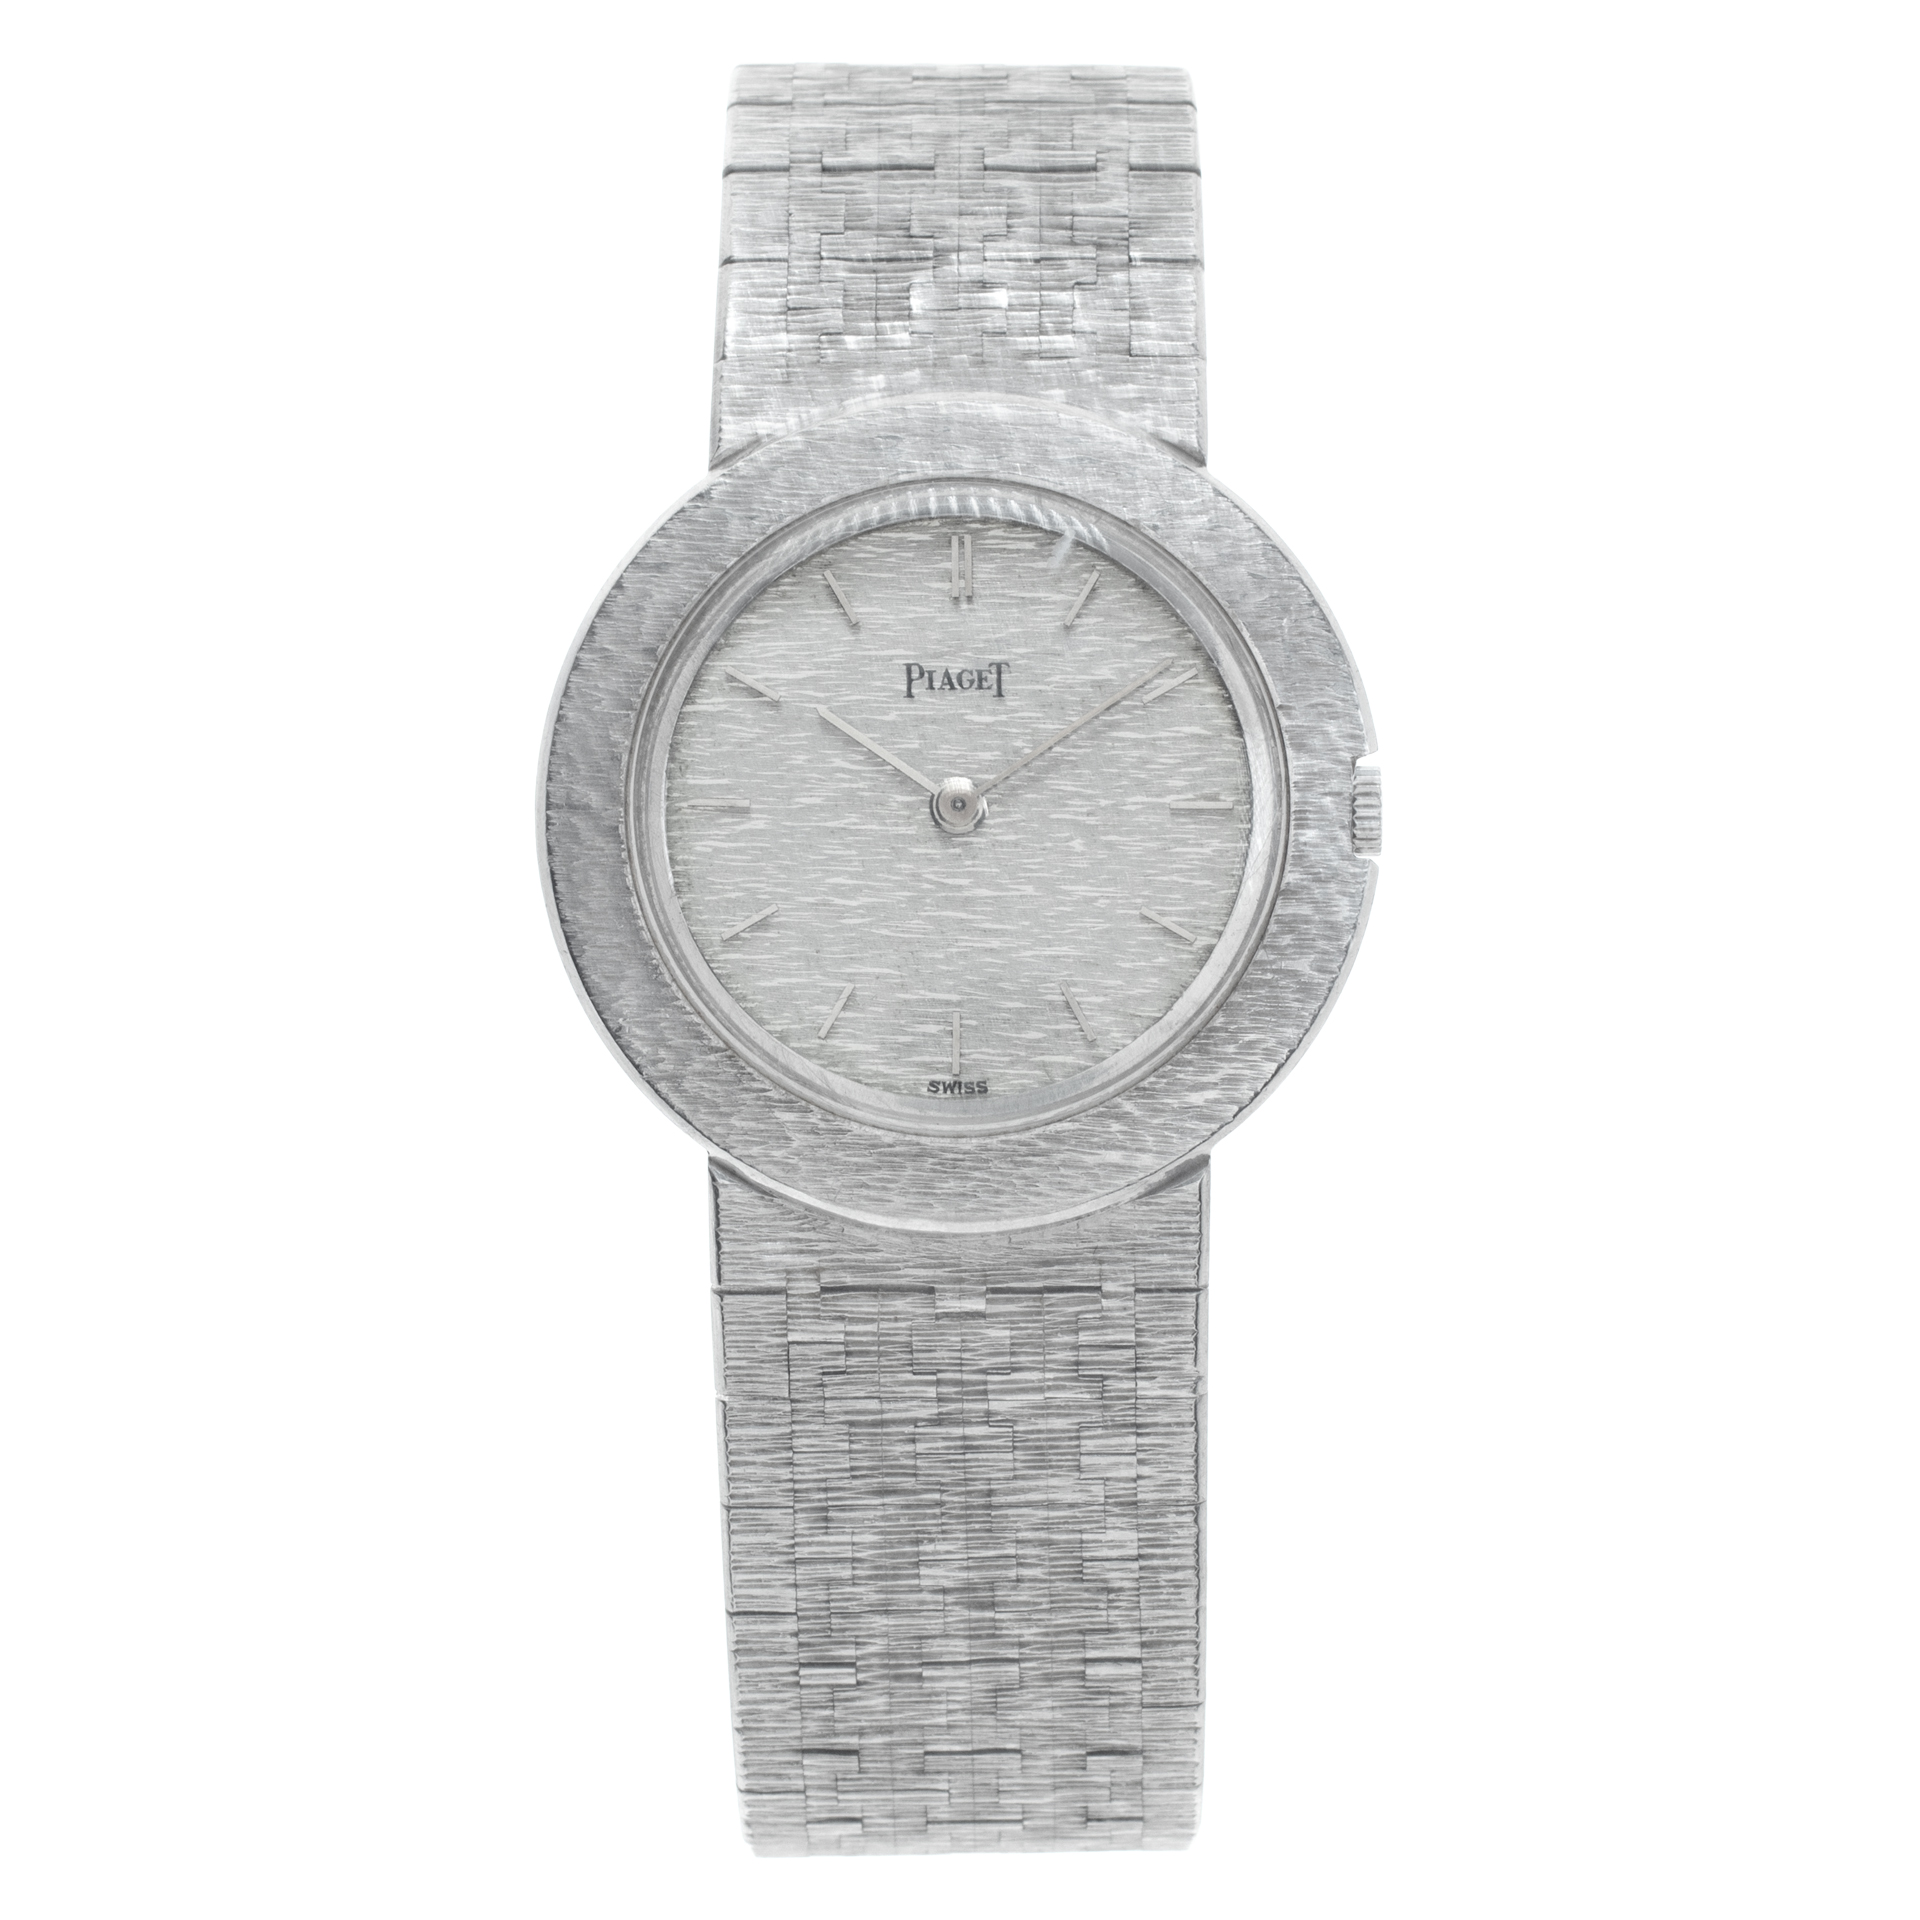 Piaget Classic 30mm 9117 AG (Watches)